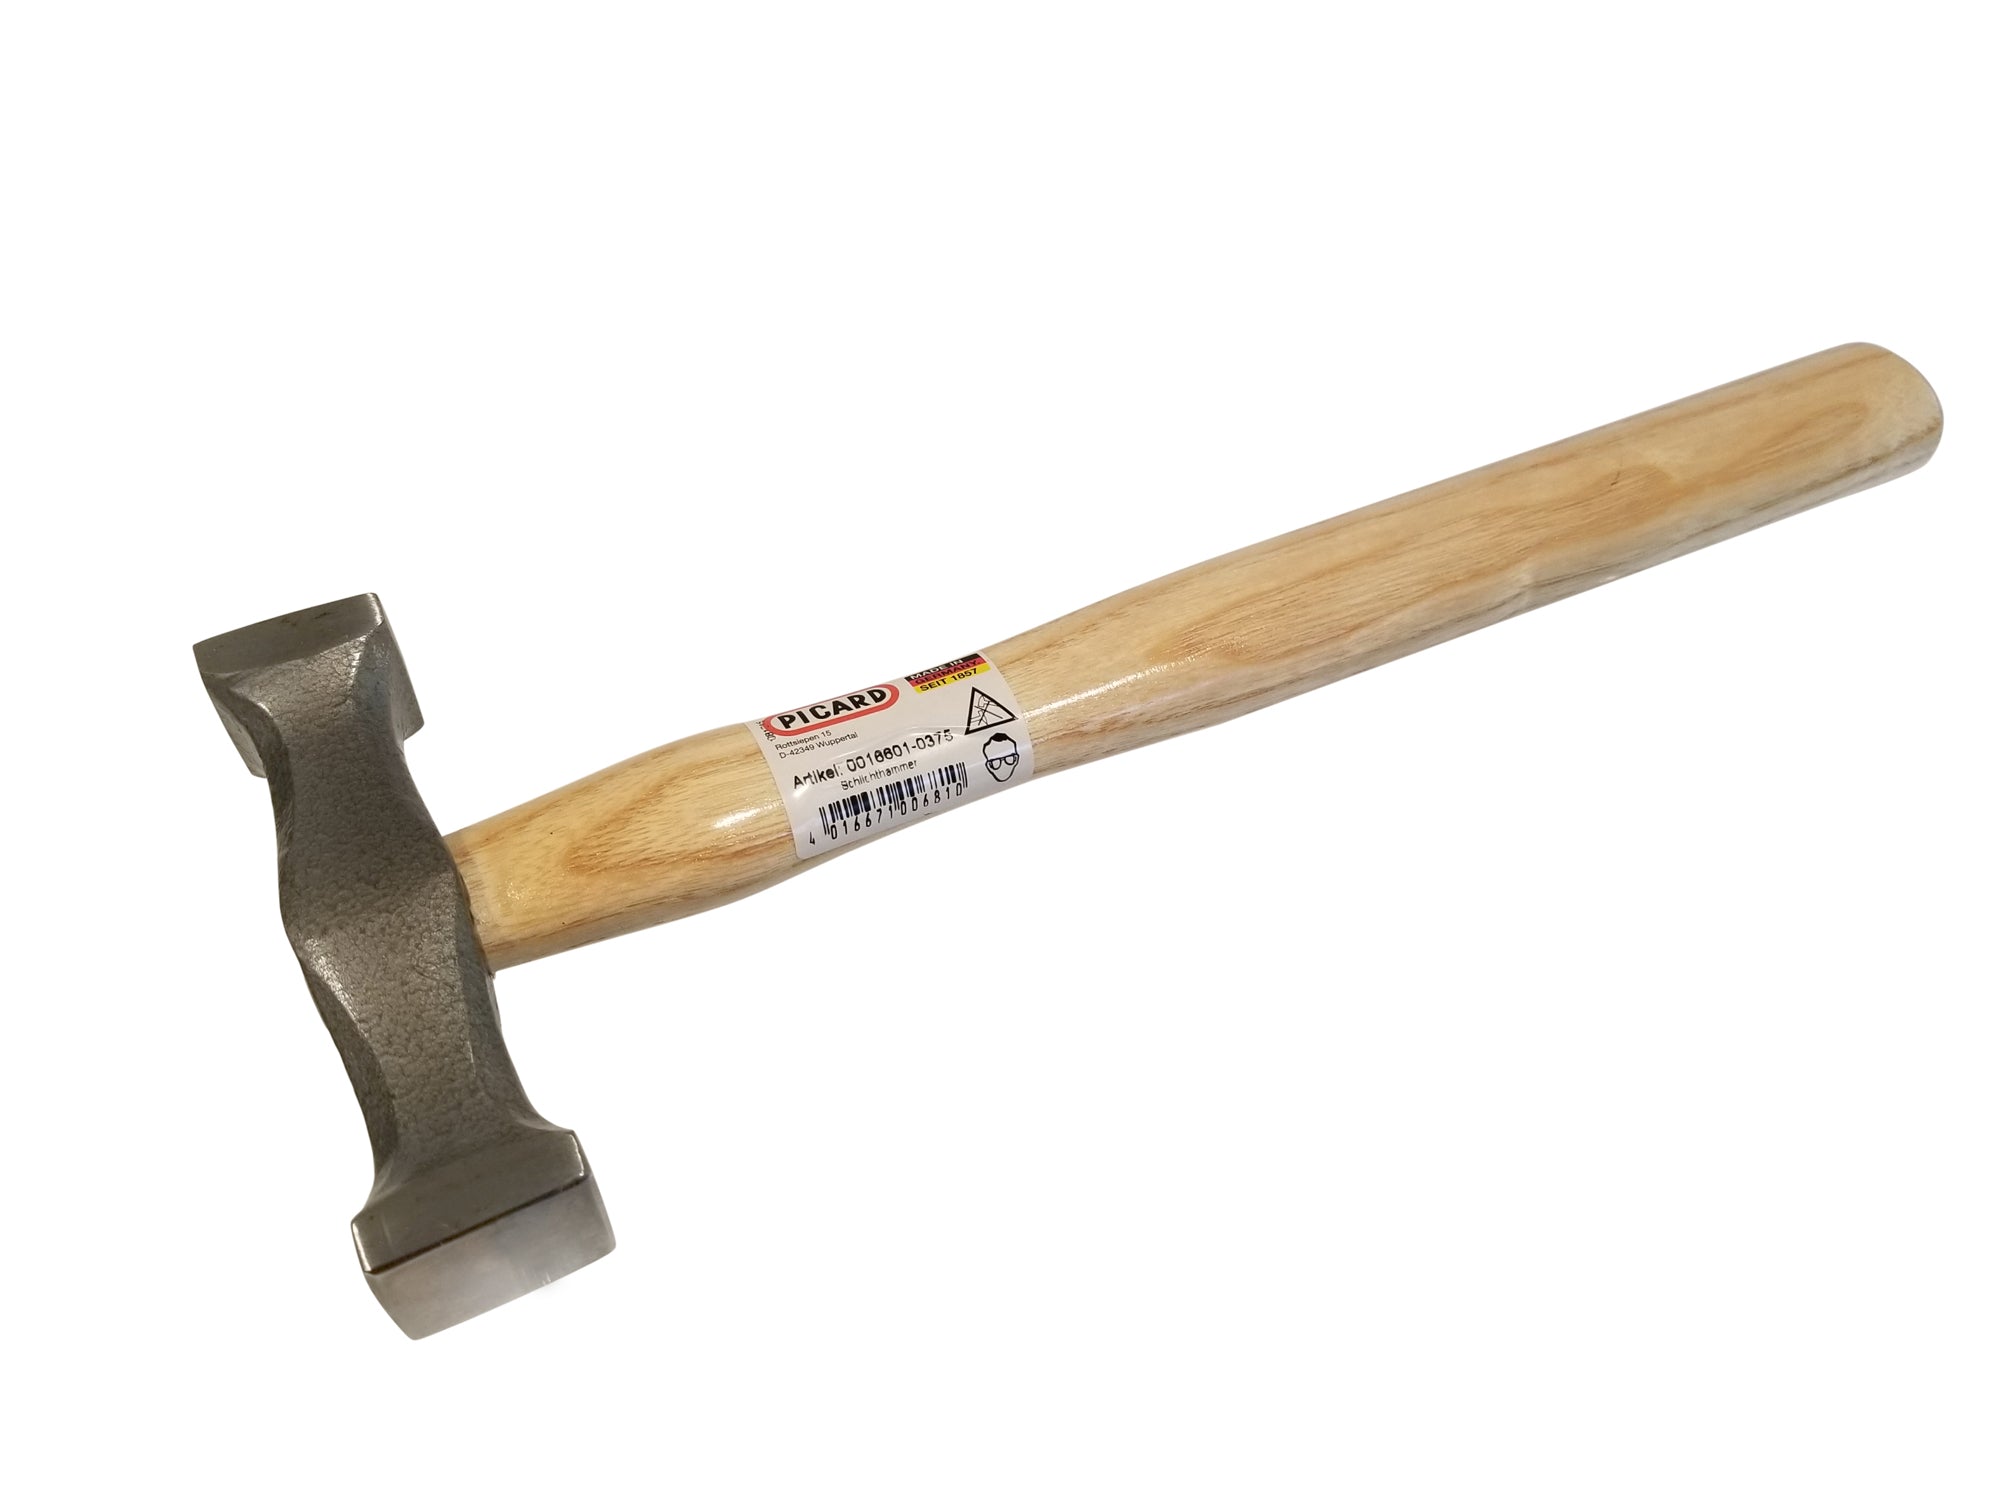 Tinsmith Silver Goldsmith 16601 Double Square Faced Planishing Hammer - Blacksmith Source Tool Company 